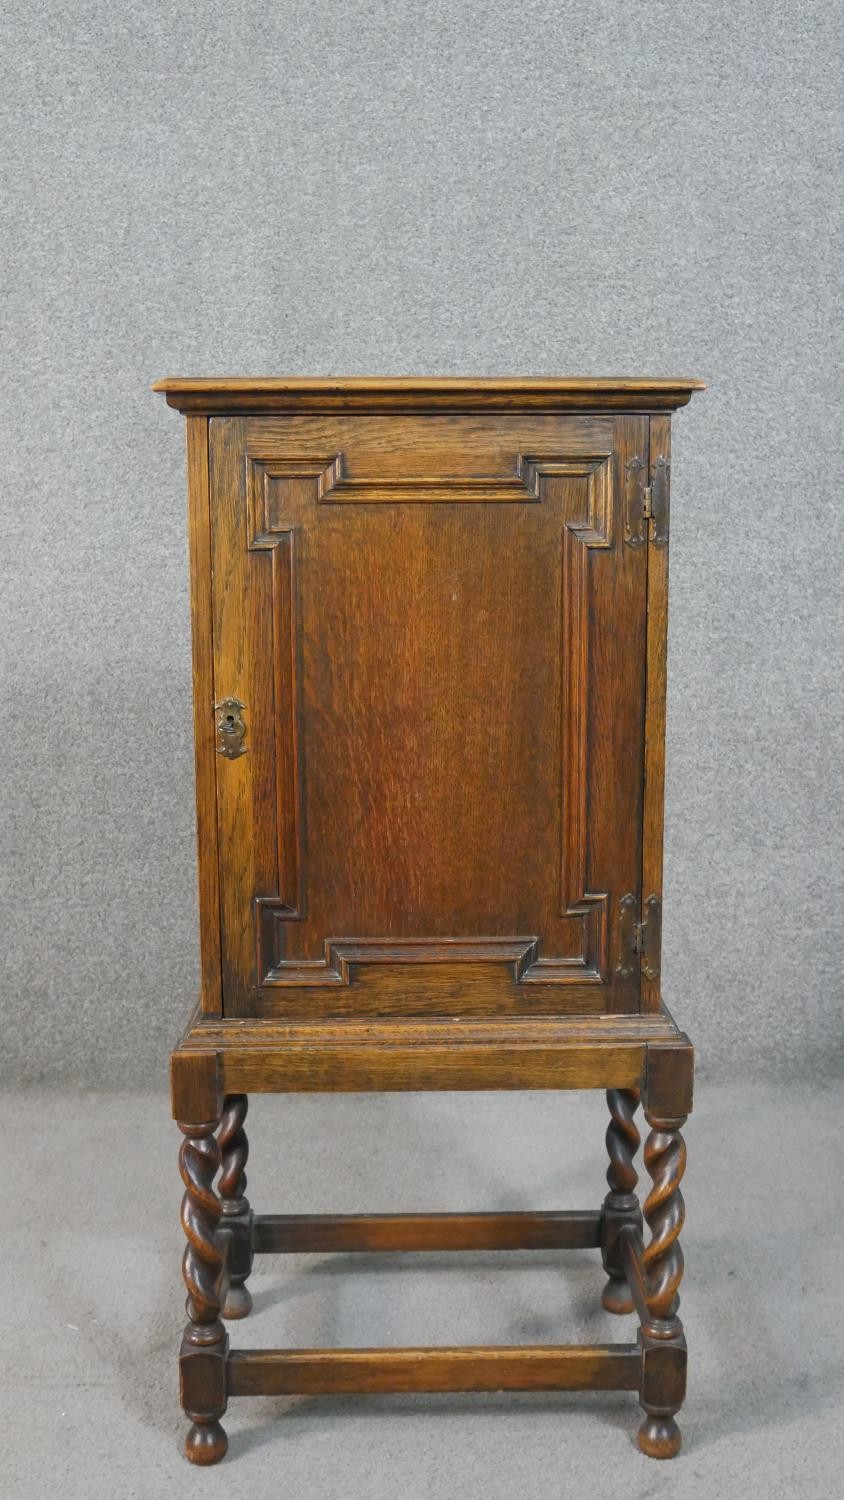 A Jacobean style oak cabinet with lozenge panel door enclosing a fitted interior on a barleytwist